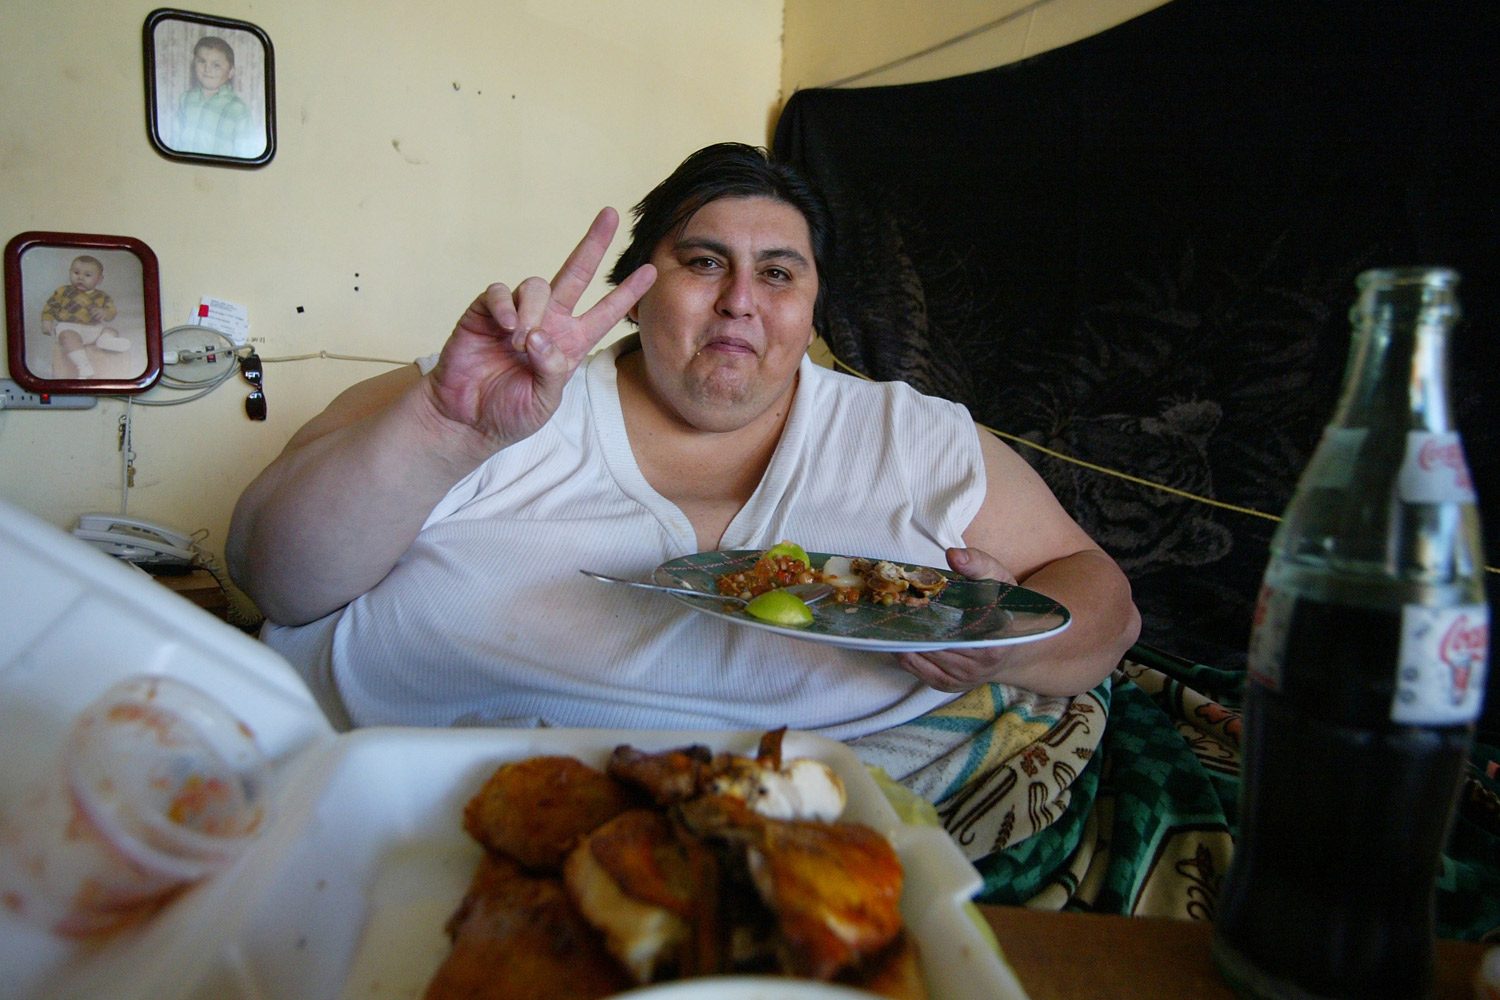 Manuel Uribe eats in his bed at home in Monterrey, Mexico, January 19, 2006. (Luis Reyes / Reuters)